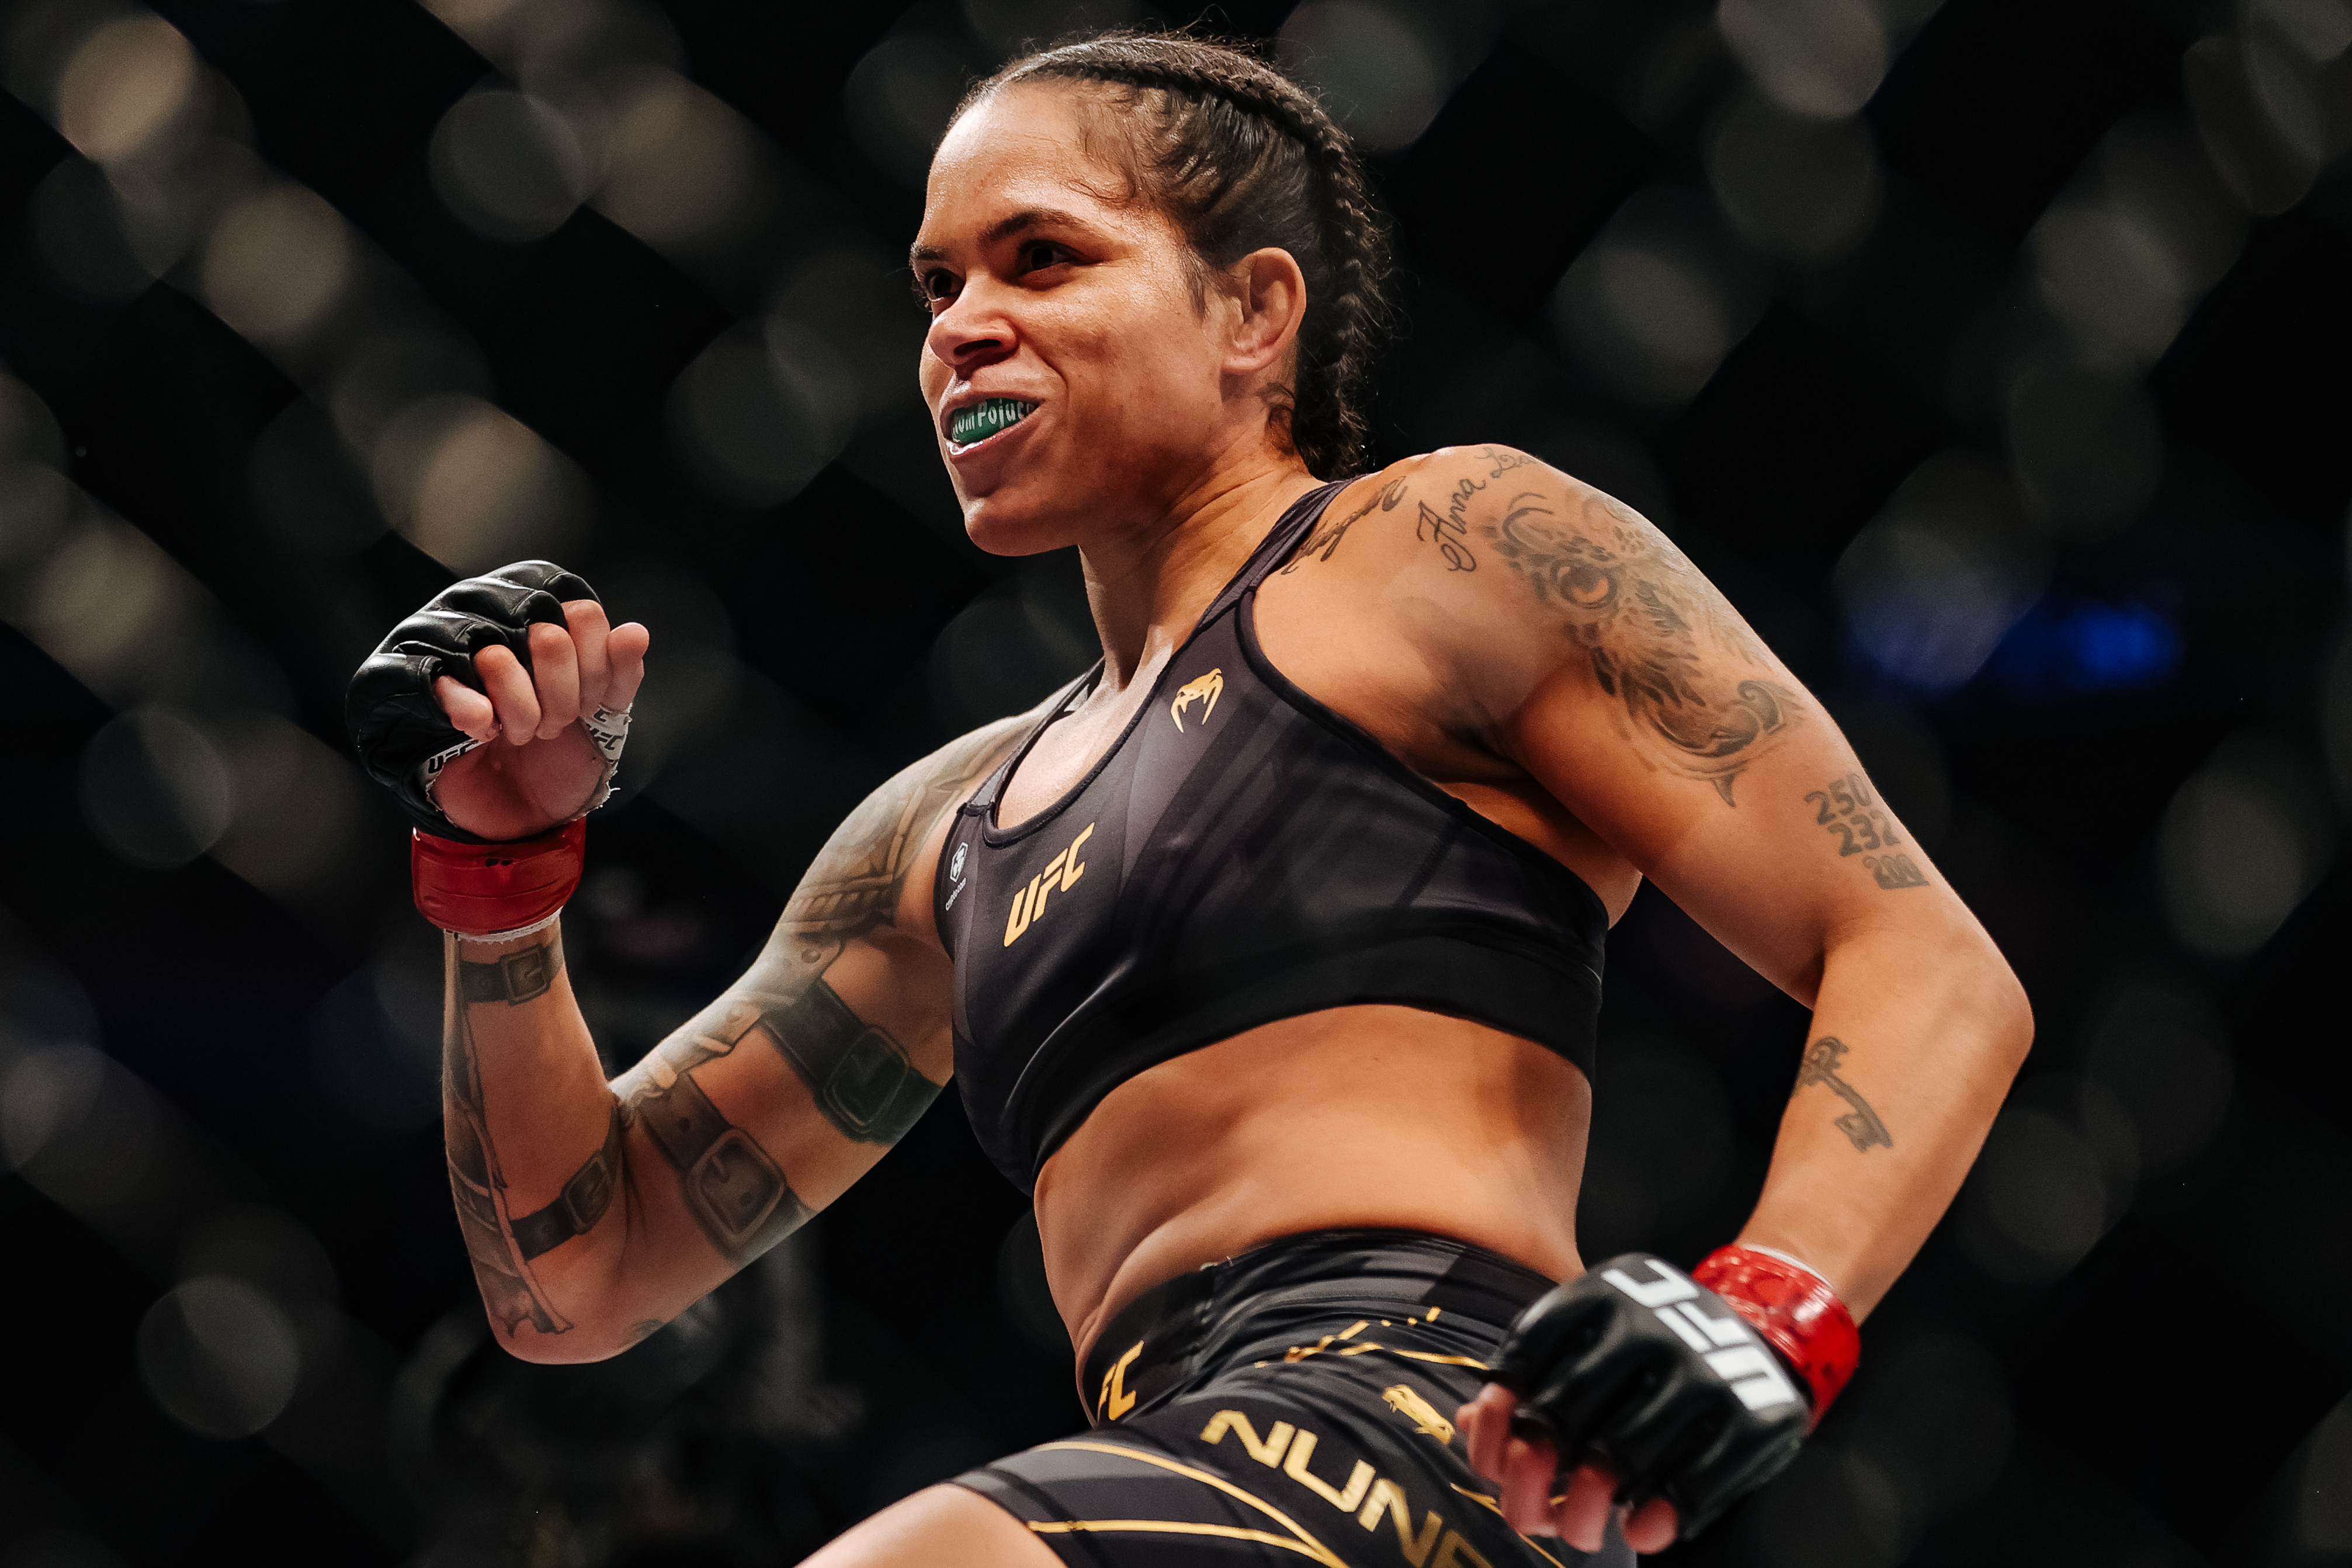 Amanda Nunes is heavily favored in her rematch with Julianna Pena&nbsp;at UFC 277